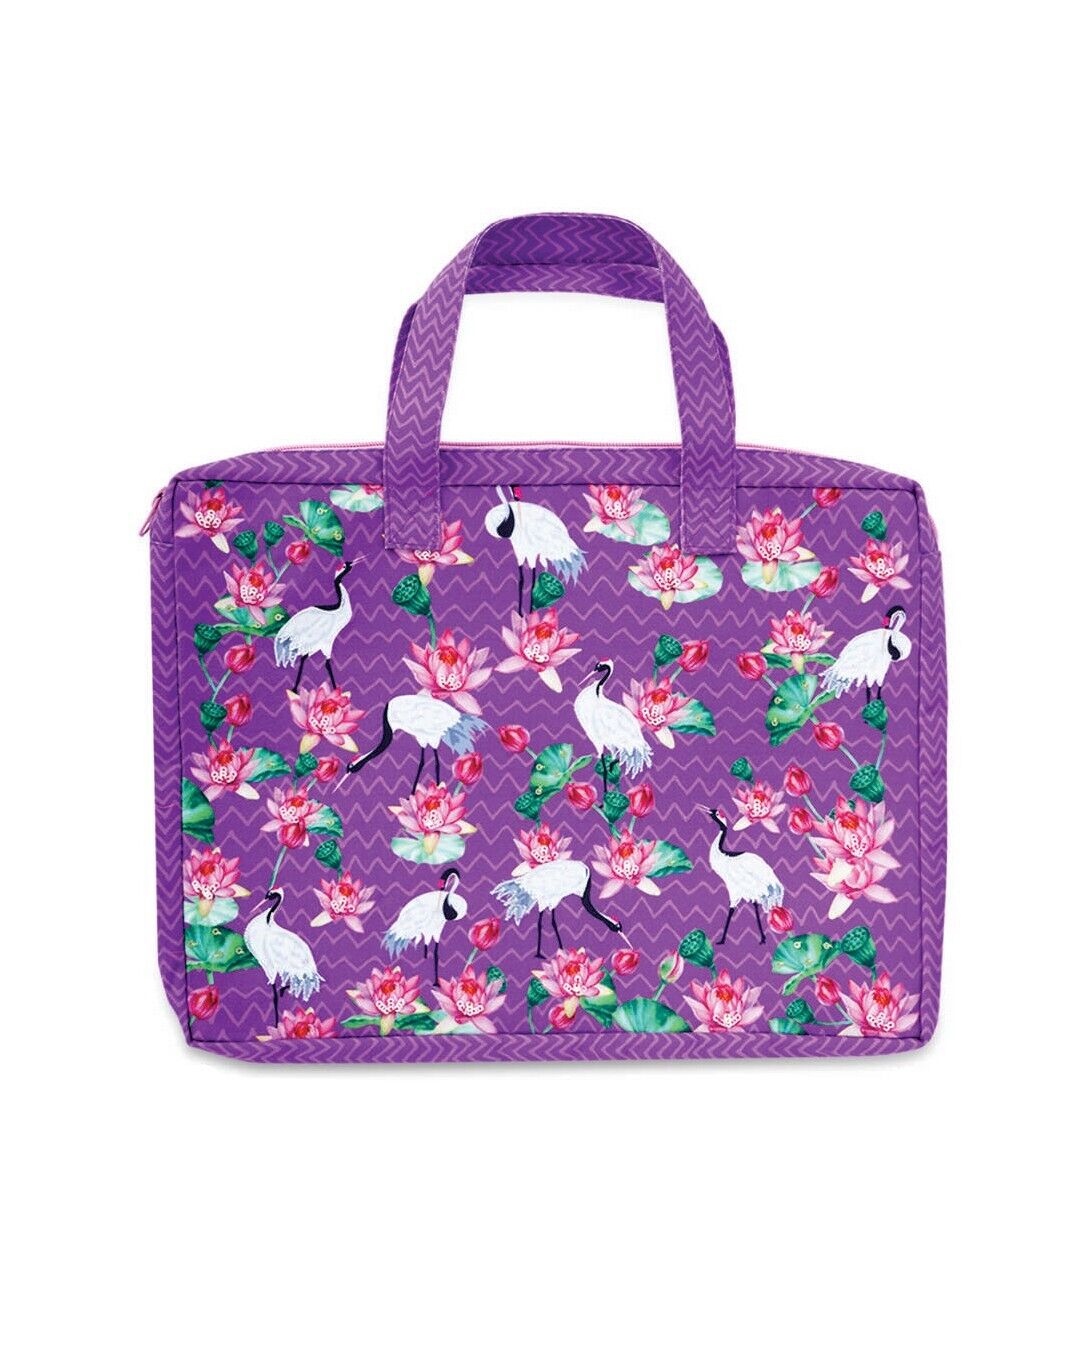 Handcraft Printed Canvas Purple Crane With Lotus Laptop Sleeve for Women & Girl